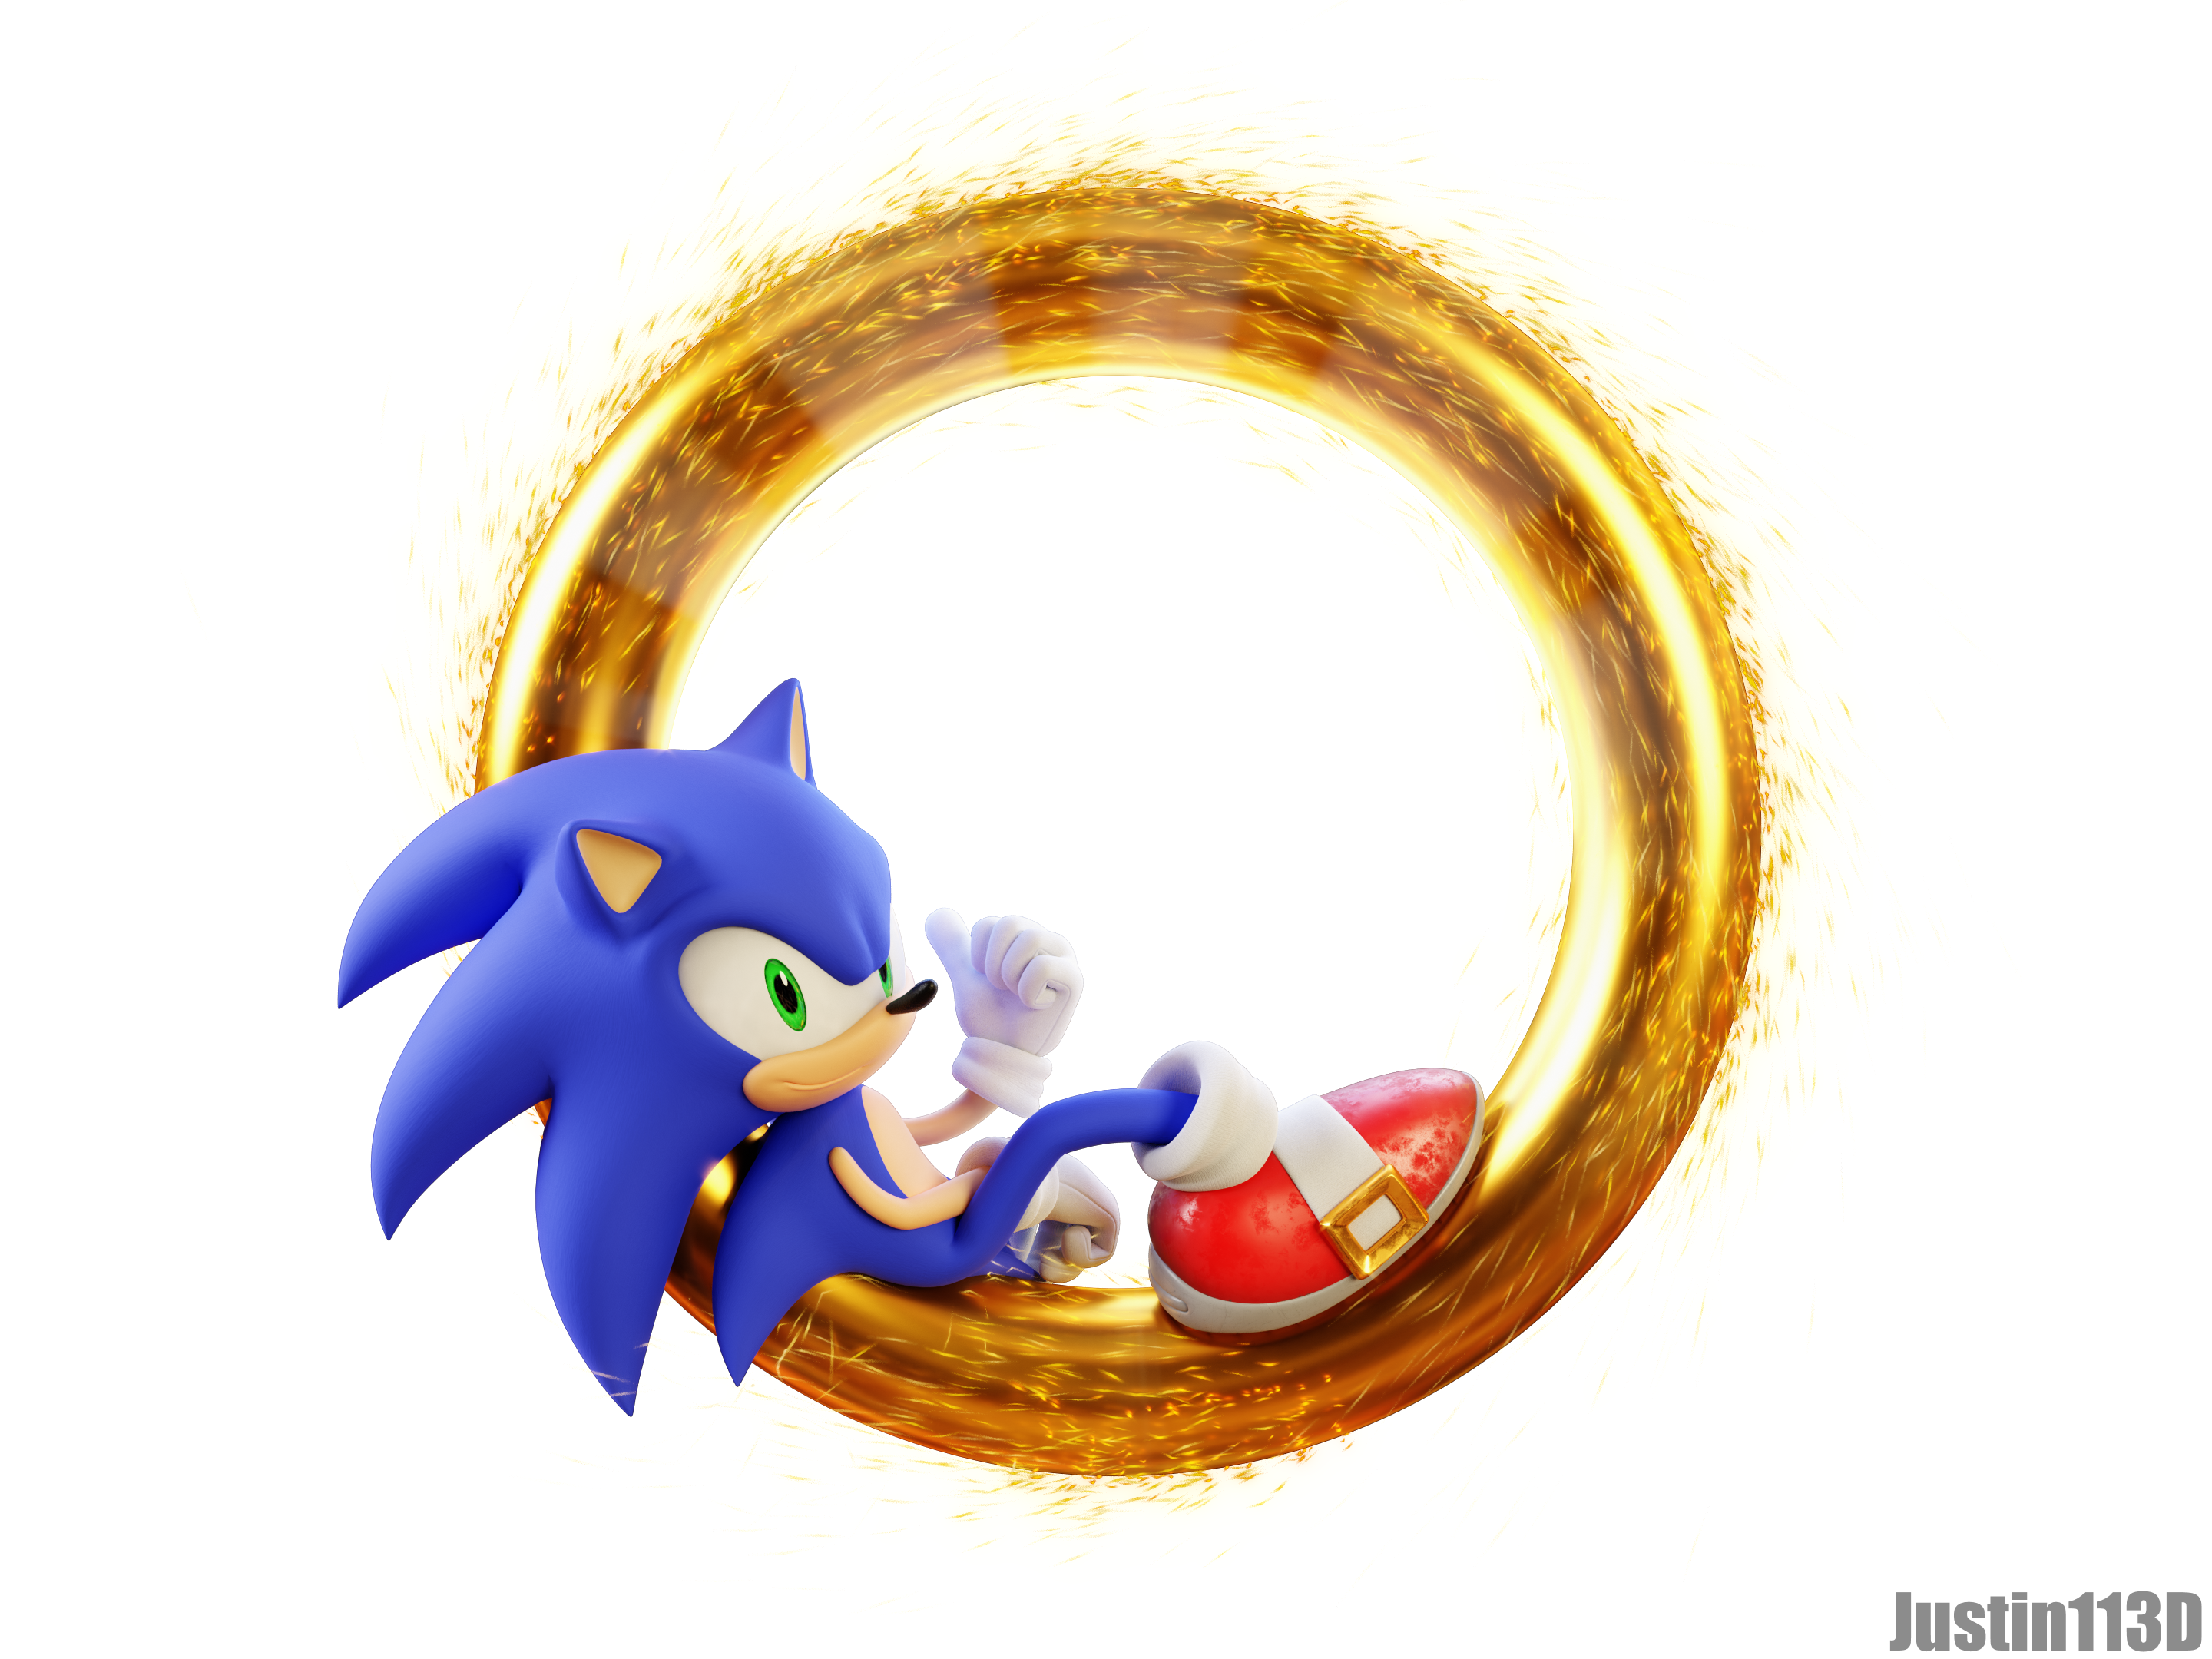 Sonic the Hedgehog Movie Ring Portal Render TR by Justin113D on